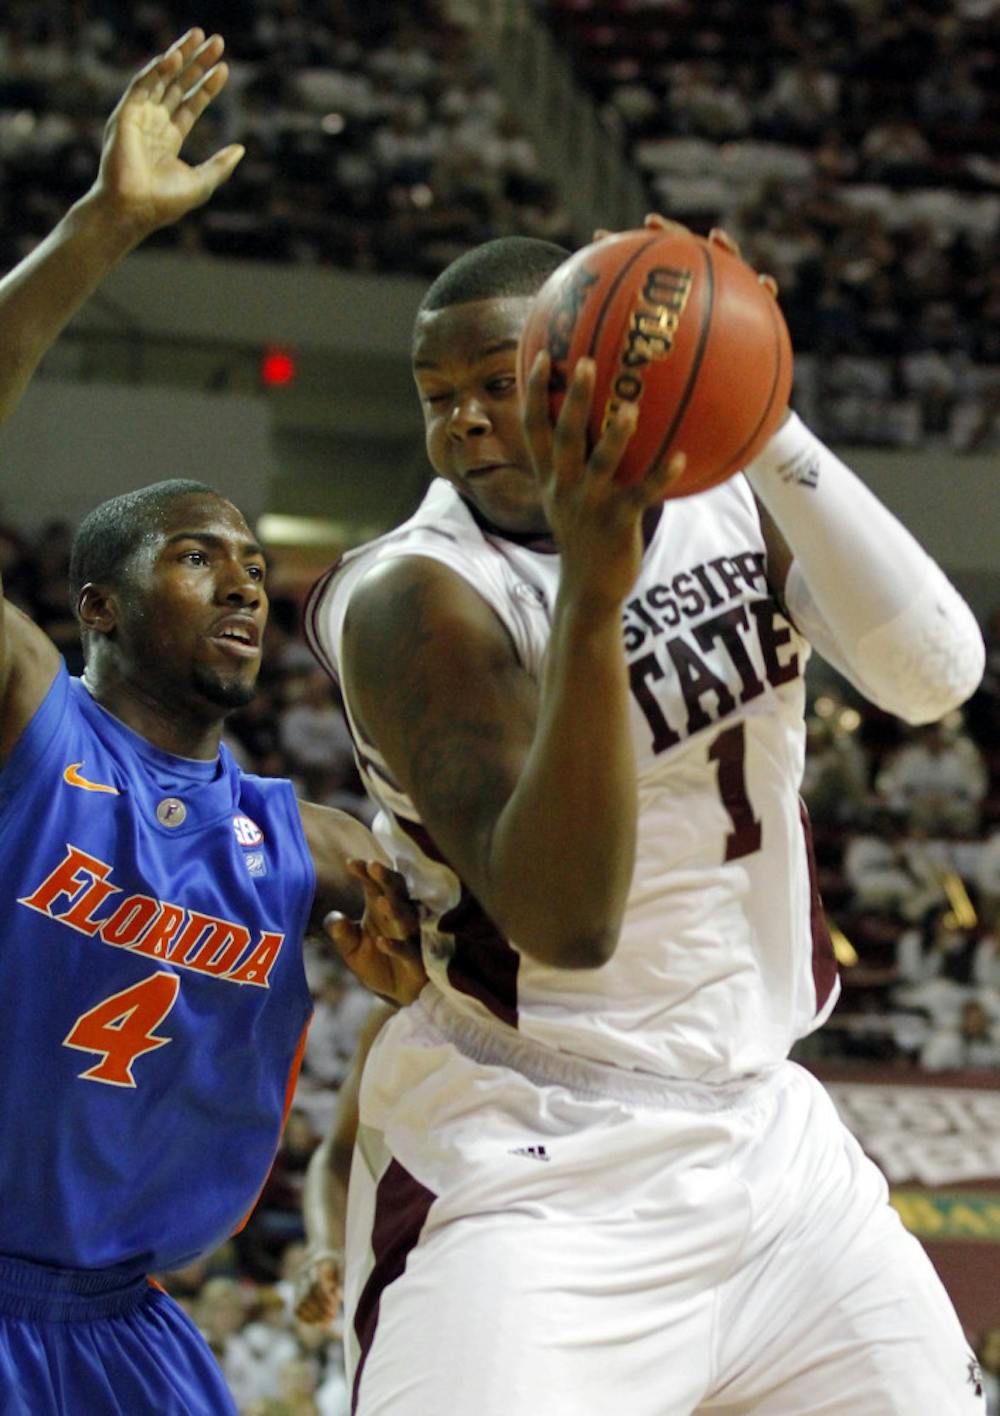 Mississippi State center Renardo Sidney scored 16 points and added eight rebounds in a 71-64 win for the Bulldogs.